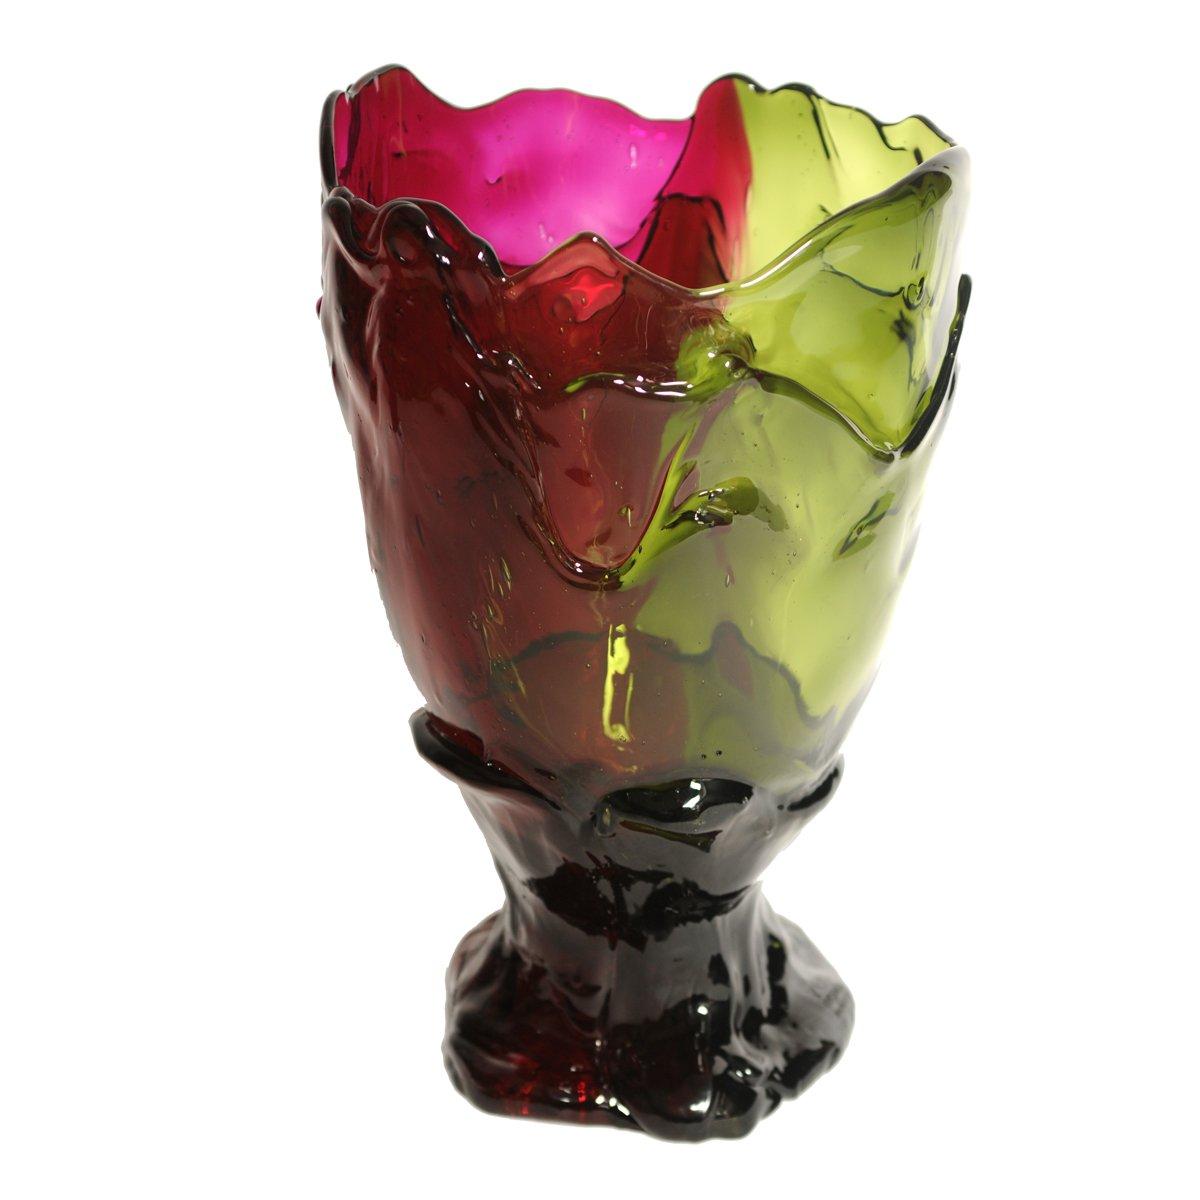 Twin-C vase, clear bottle green, clear fuchsia

Vase in soft resin designed by Gaetano Pesce in 1995 for Fish Design collection.

Measures: XL - ø 30cm x H 56cm

Other sizes available.

Colours: clear bottle green, clear fuchsia

Vase in